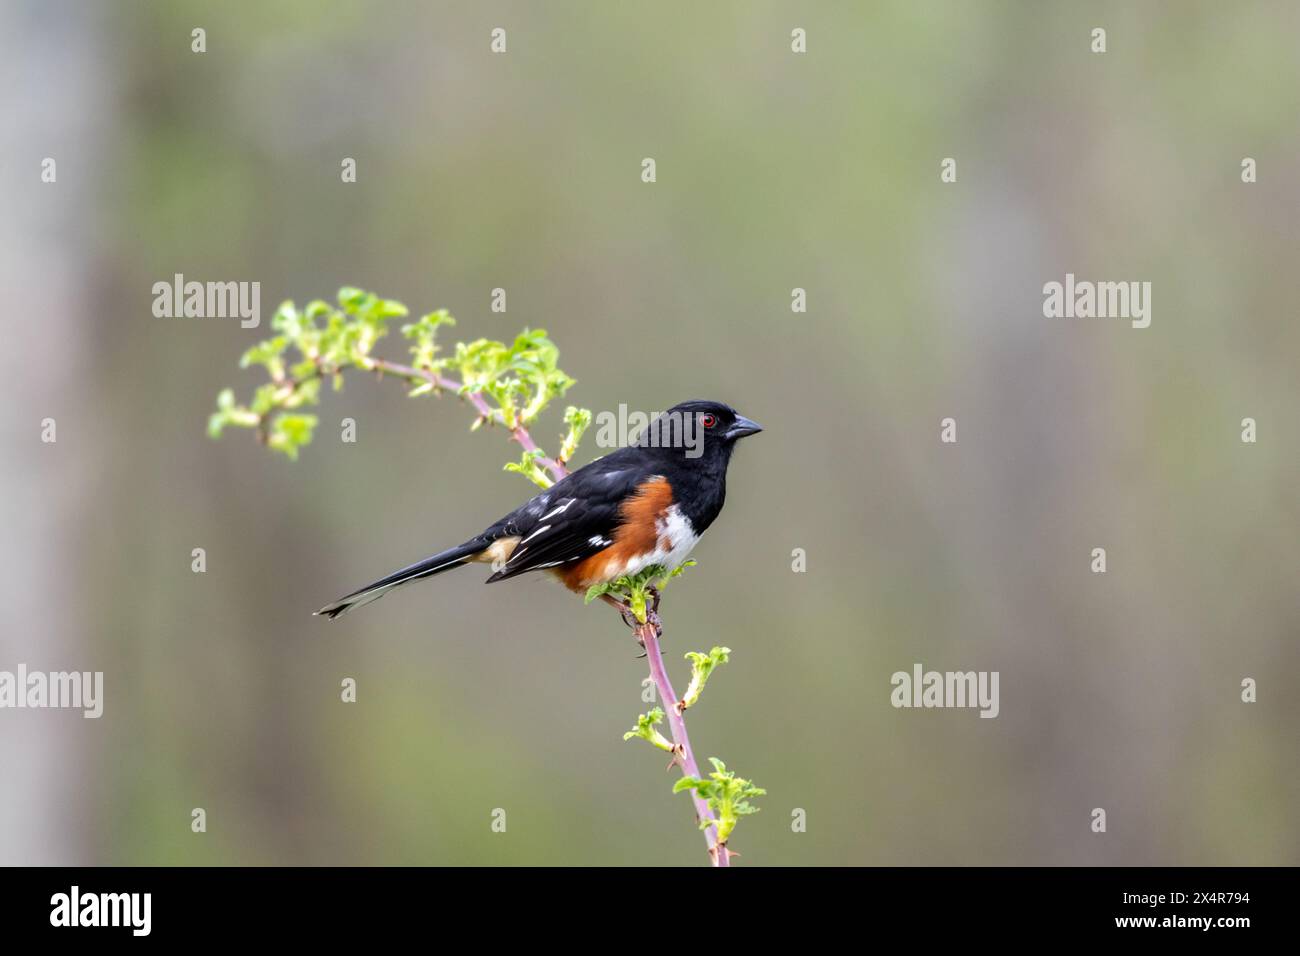 Male Eastern Towhee, Pipilo erythrophthalmus, perched on single branch looking green muted background copy space Stock Photo